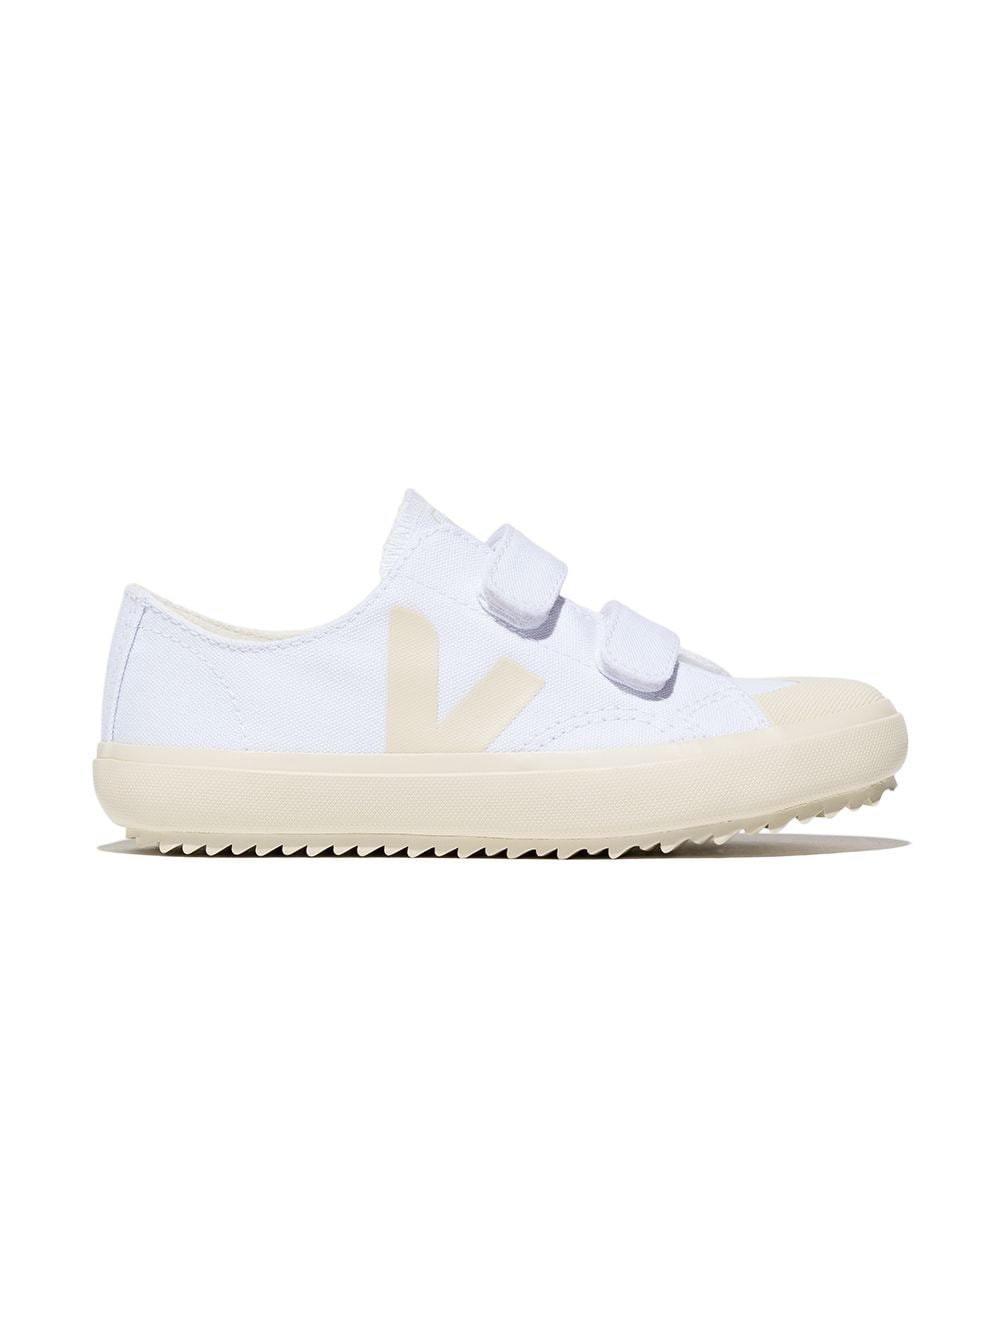 VEJA Kids Small Ollie touch-strap sneakers - White